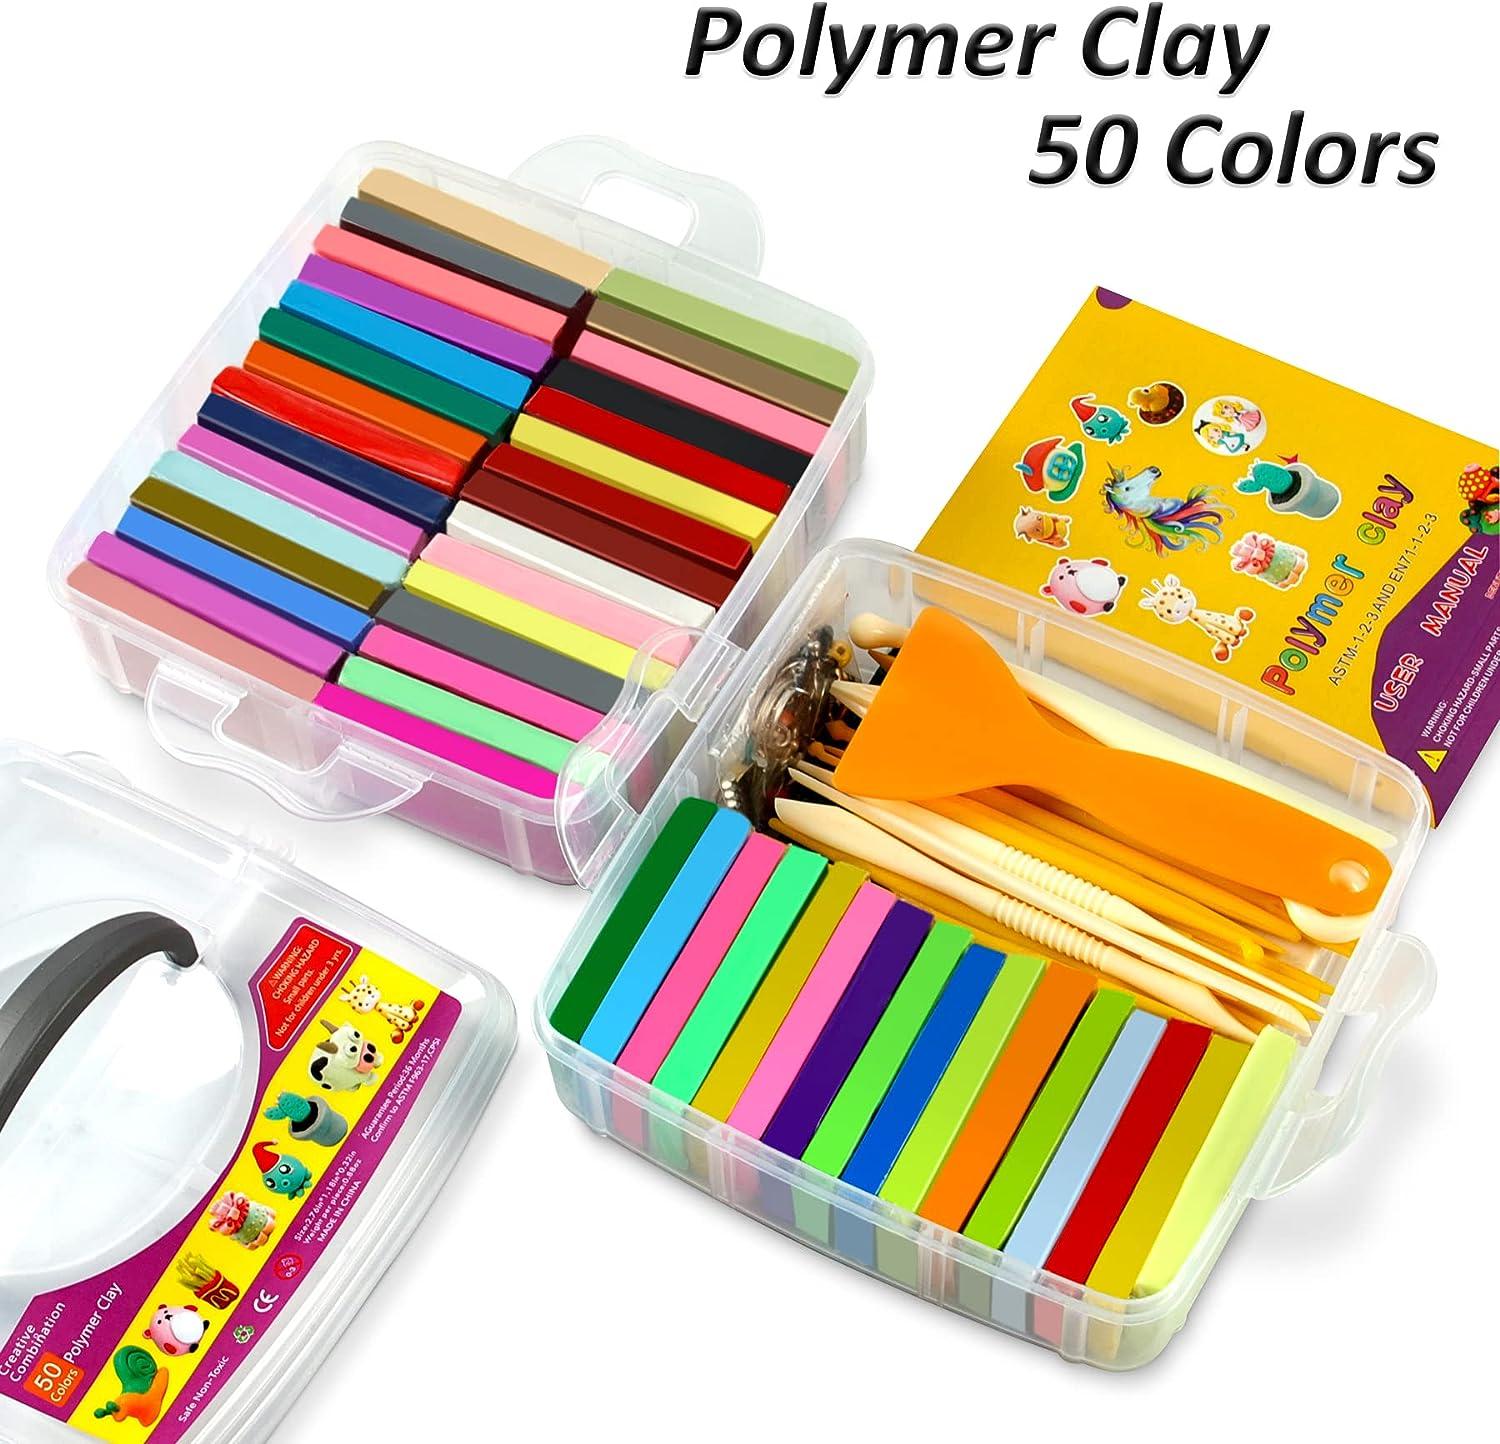 Polymer Clay 50 Colors, Modeling Clay for Kids, Non-Sticky Oven Bake Clay  with Sculpting Tools and Accessories, Halloween Christmas Gift for Children